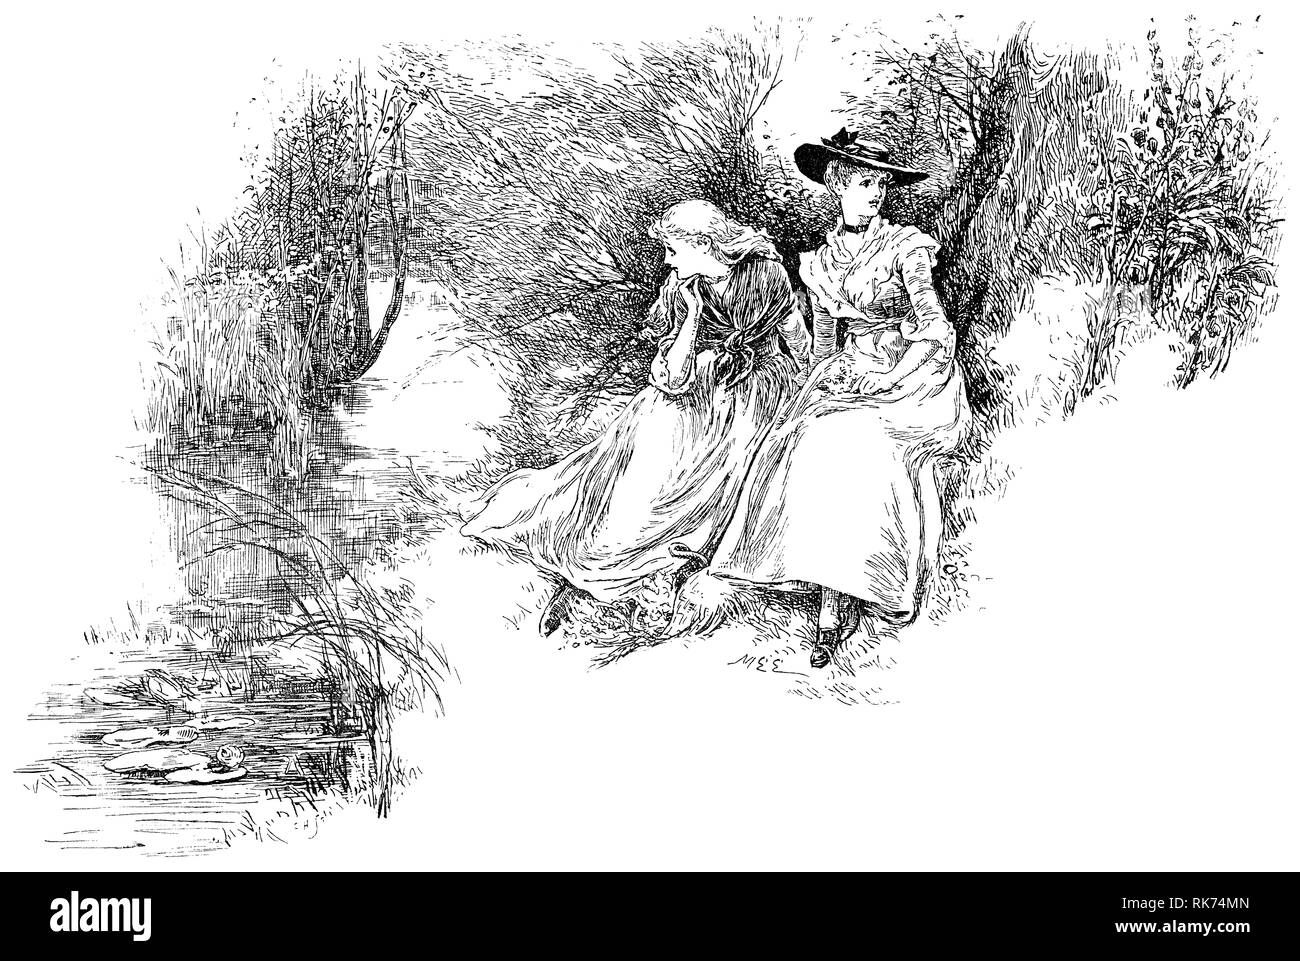 Illustration by Mary Ellen Edwards (1838-1934) of two young ladies in Victorian costume sitting by a river. From Nister's Holiday Annual 1892. Stock Photo